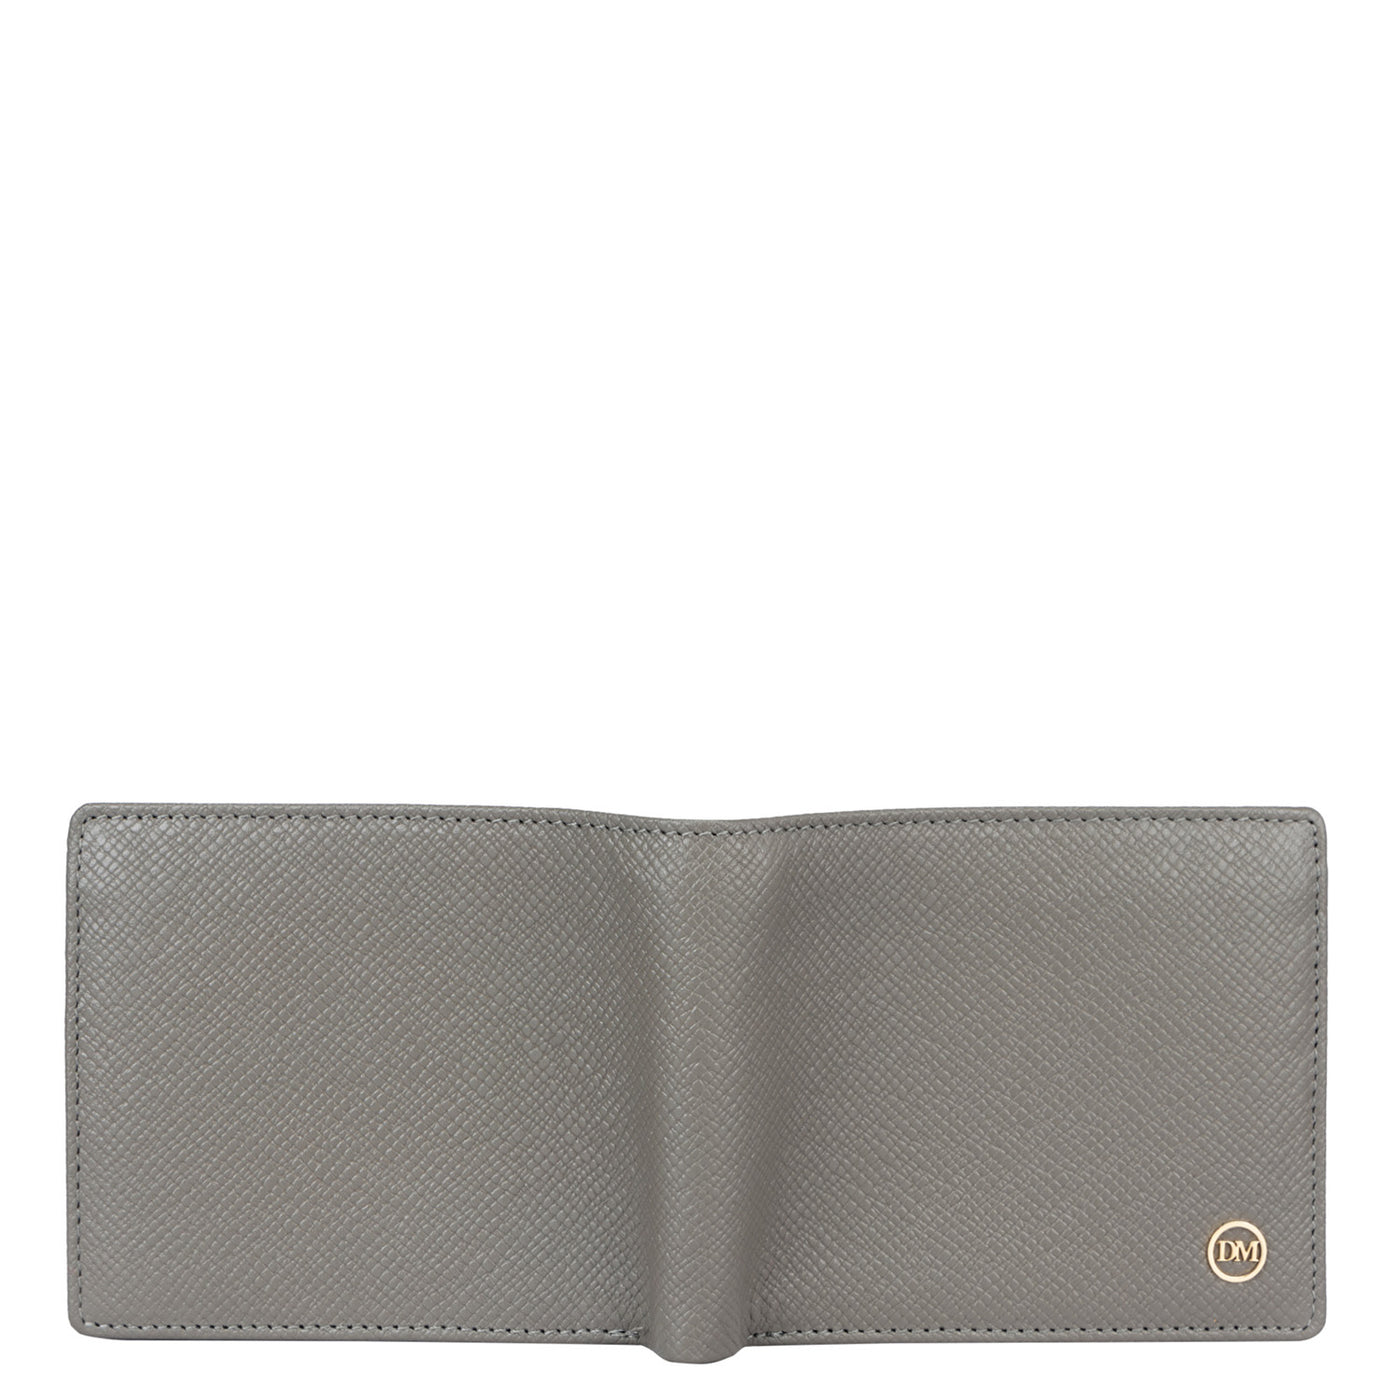 Franzy Leather Mens Wallet - Fossil